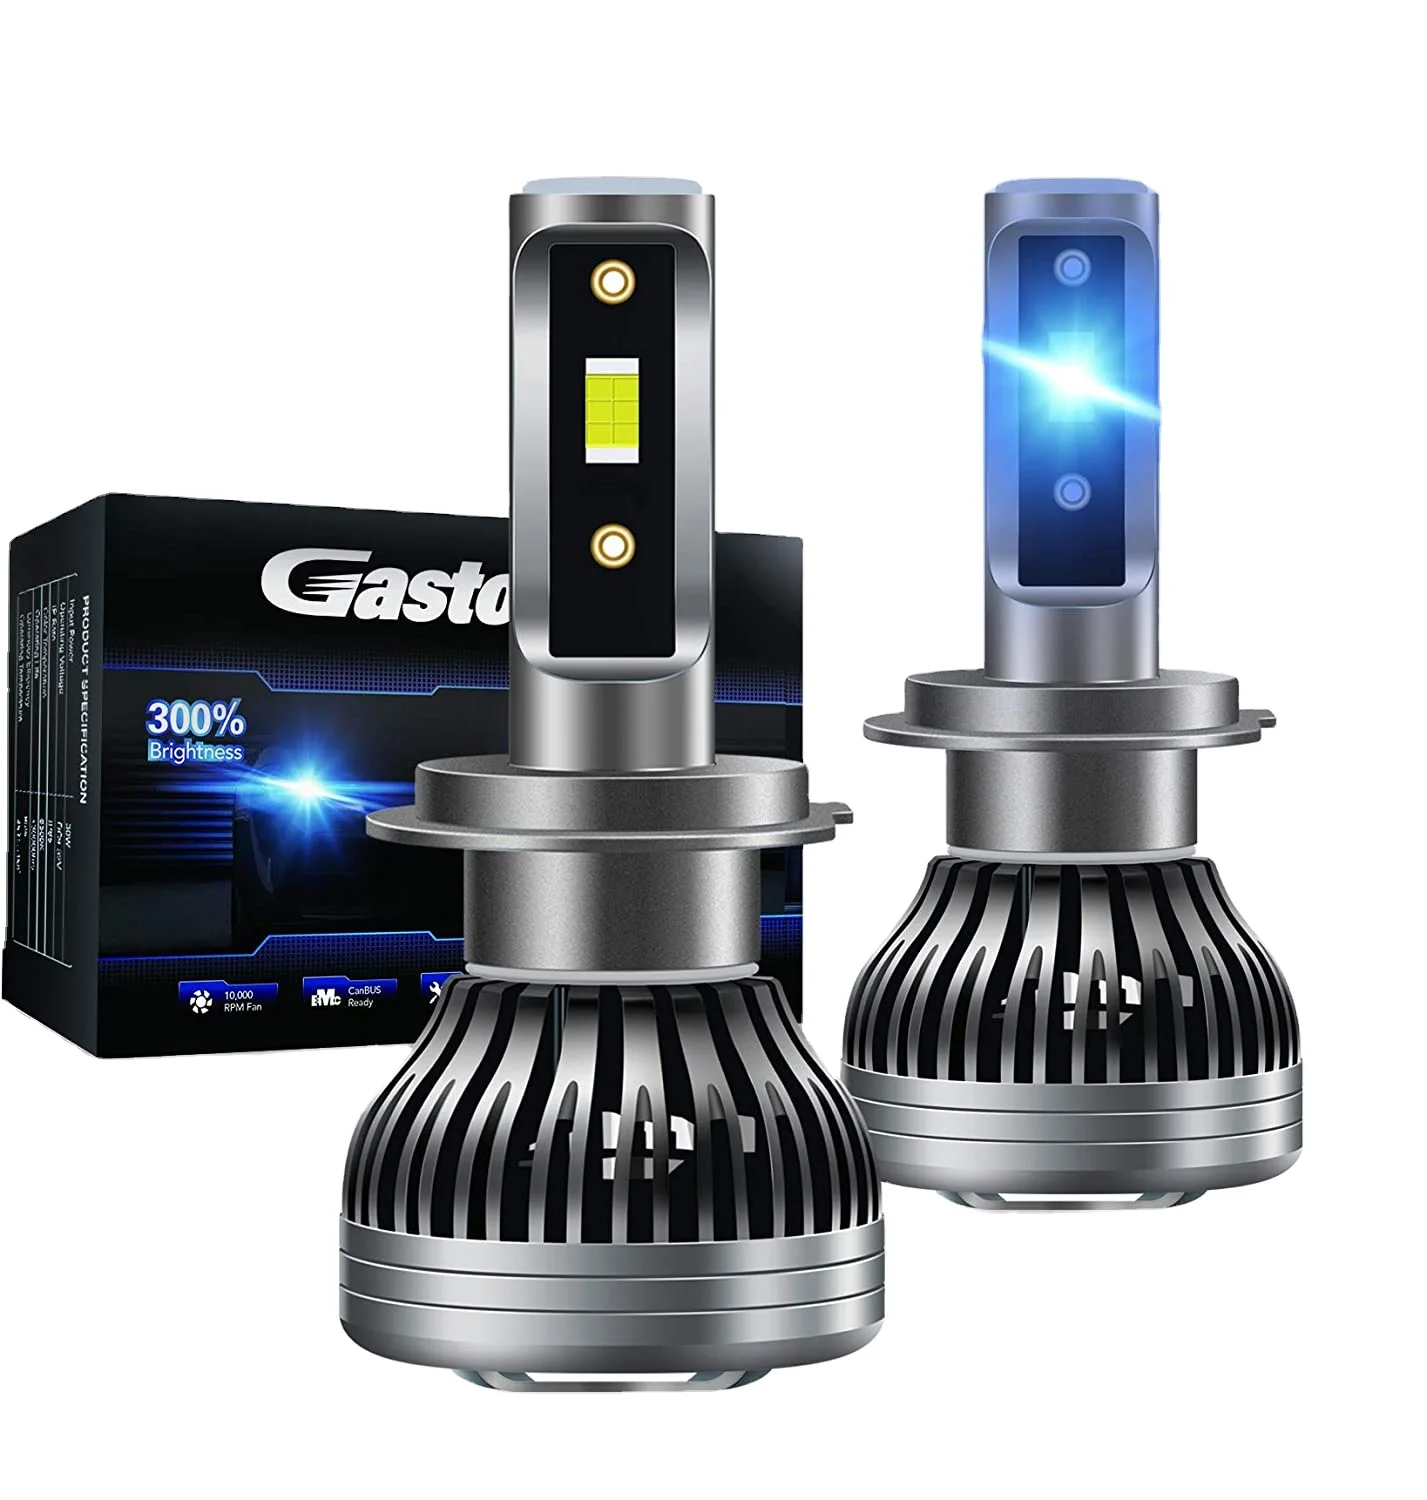 Hick Og hold stewardesse Gastokyle H7 Led Headlight Bulbs60 W 10000 Lumens 6500k Xenon White  All-in-one Conversion Kit Halogen Replacement Pack Of 2 - Buy H7 Led  Headlight Bulbs,Halogen Replacement,60 W 10000 Lumens 6500k Product on